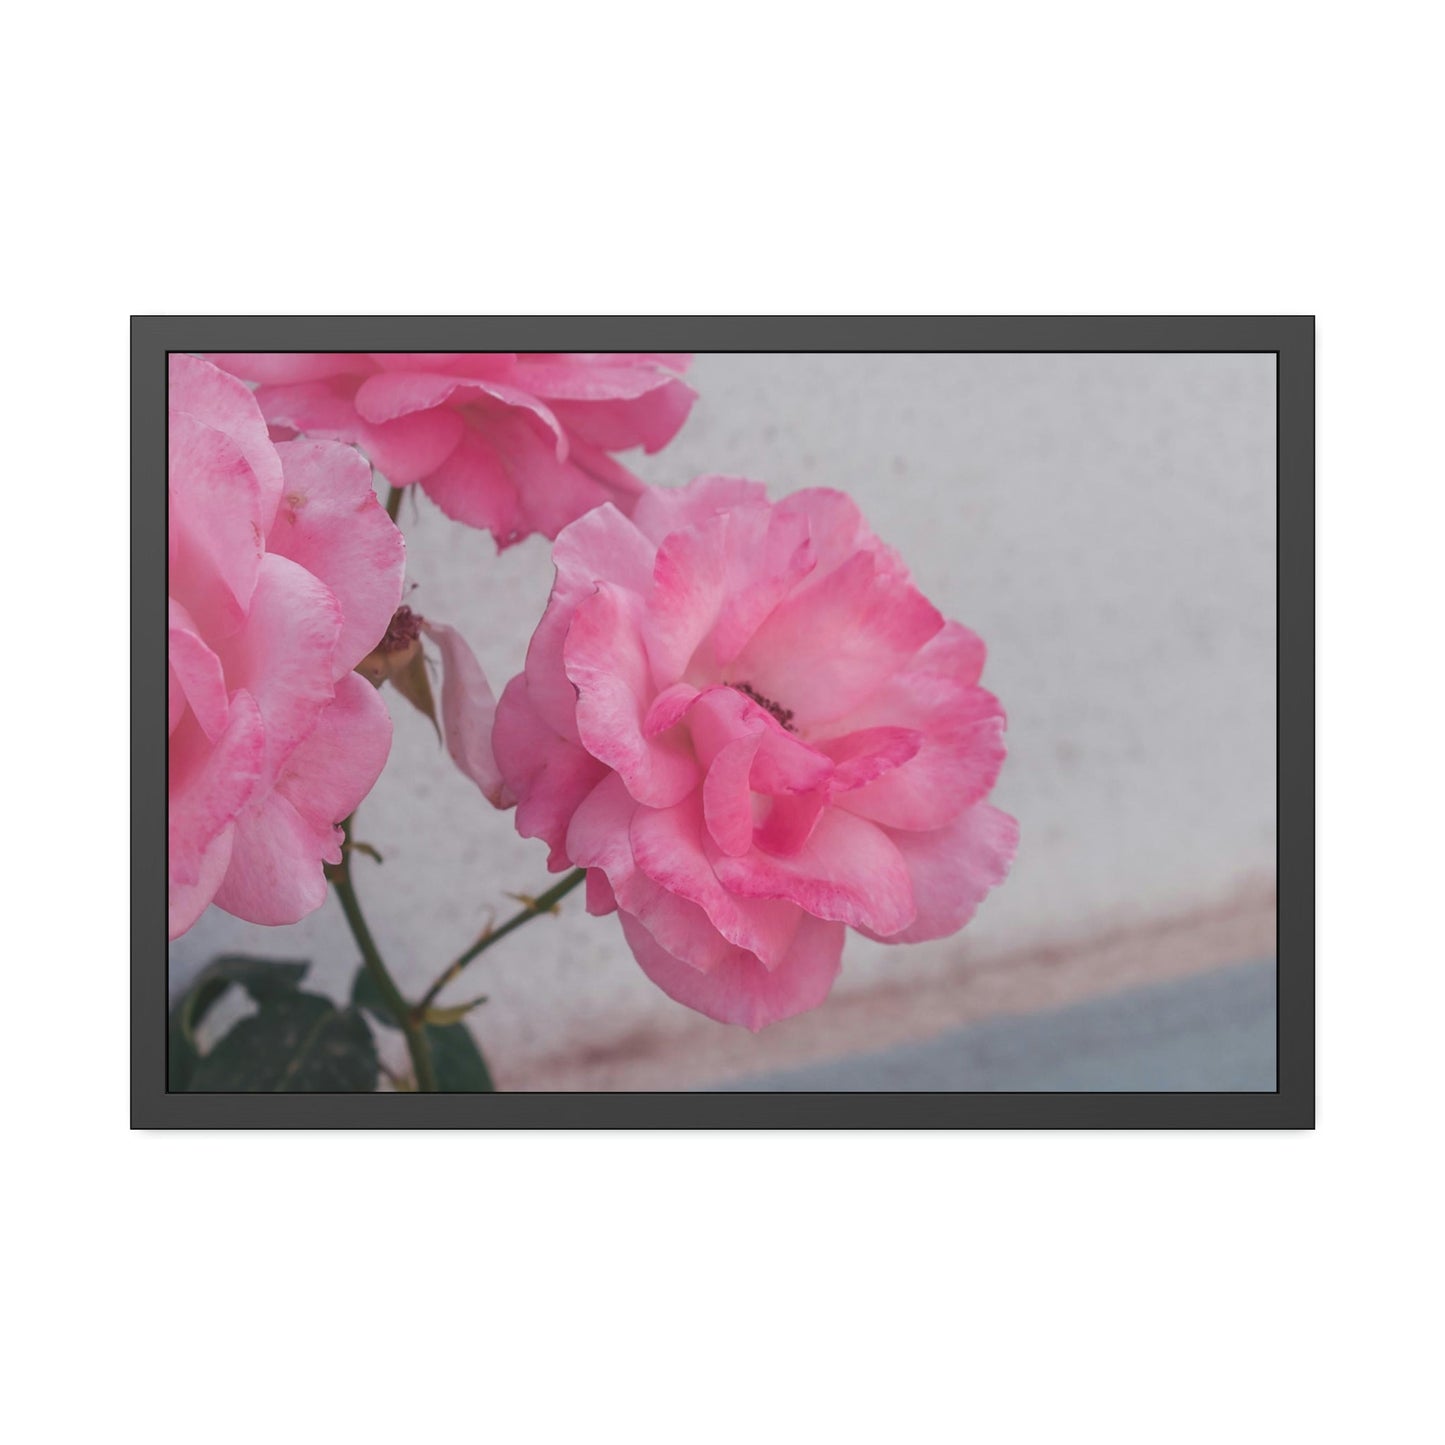 Floral Dreams: Canvas Print of Flowers for Bedroom Decor